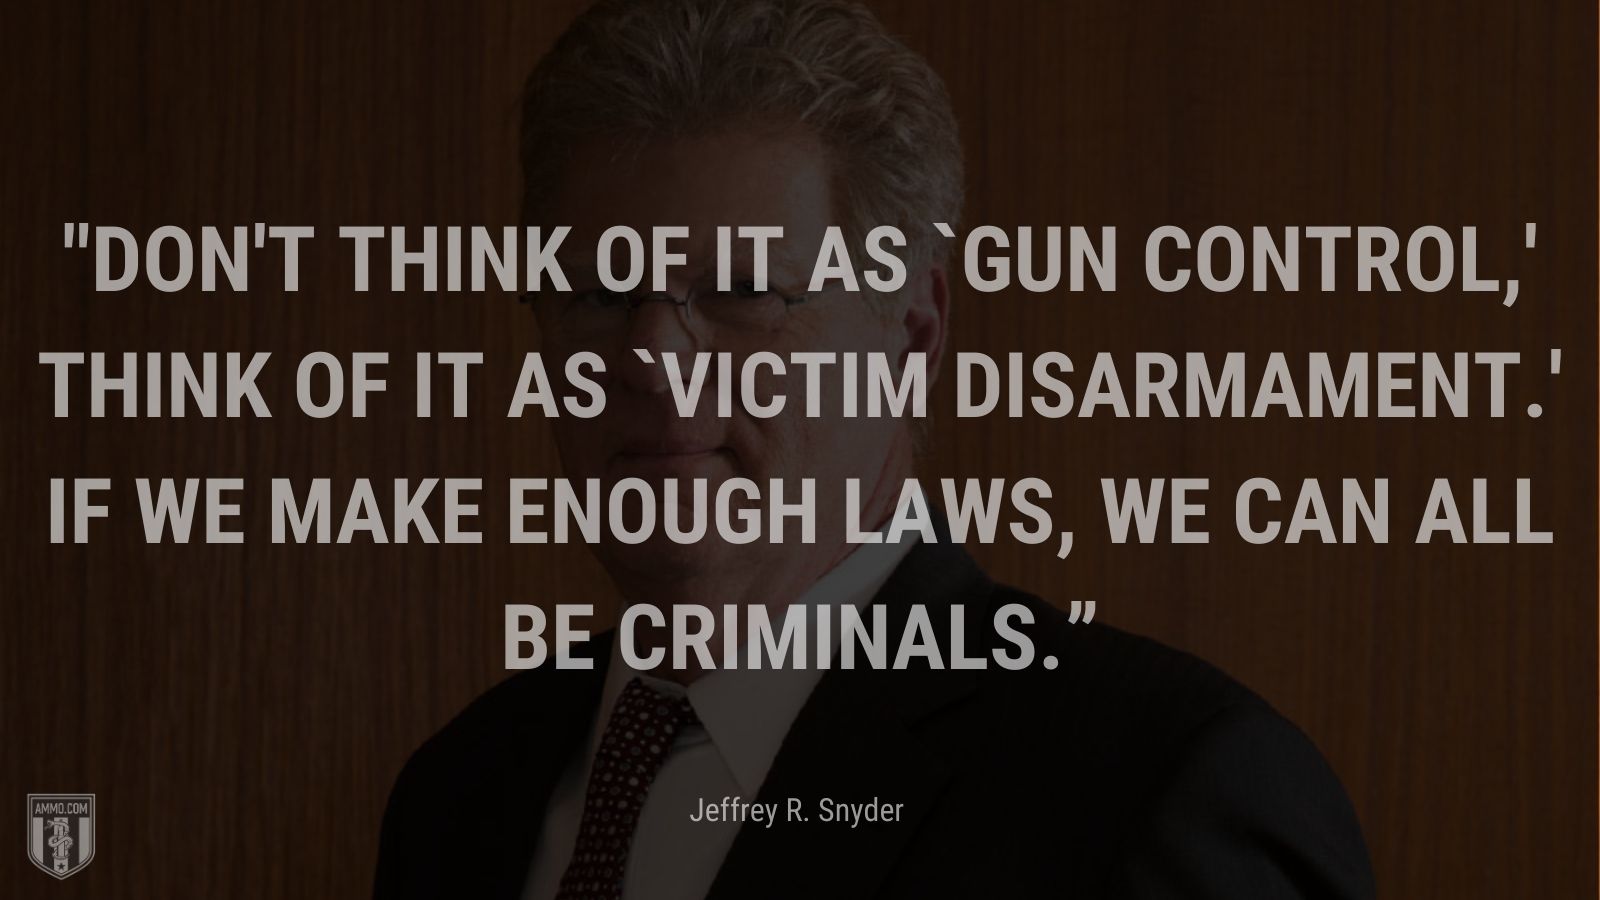 “Don't think of it as `gun control,' think of it as `victim disarmament.' If we make enough laws, we can all be criminals.” - Jeffrey R. Snyder